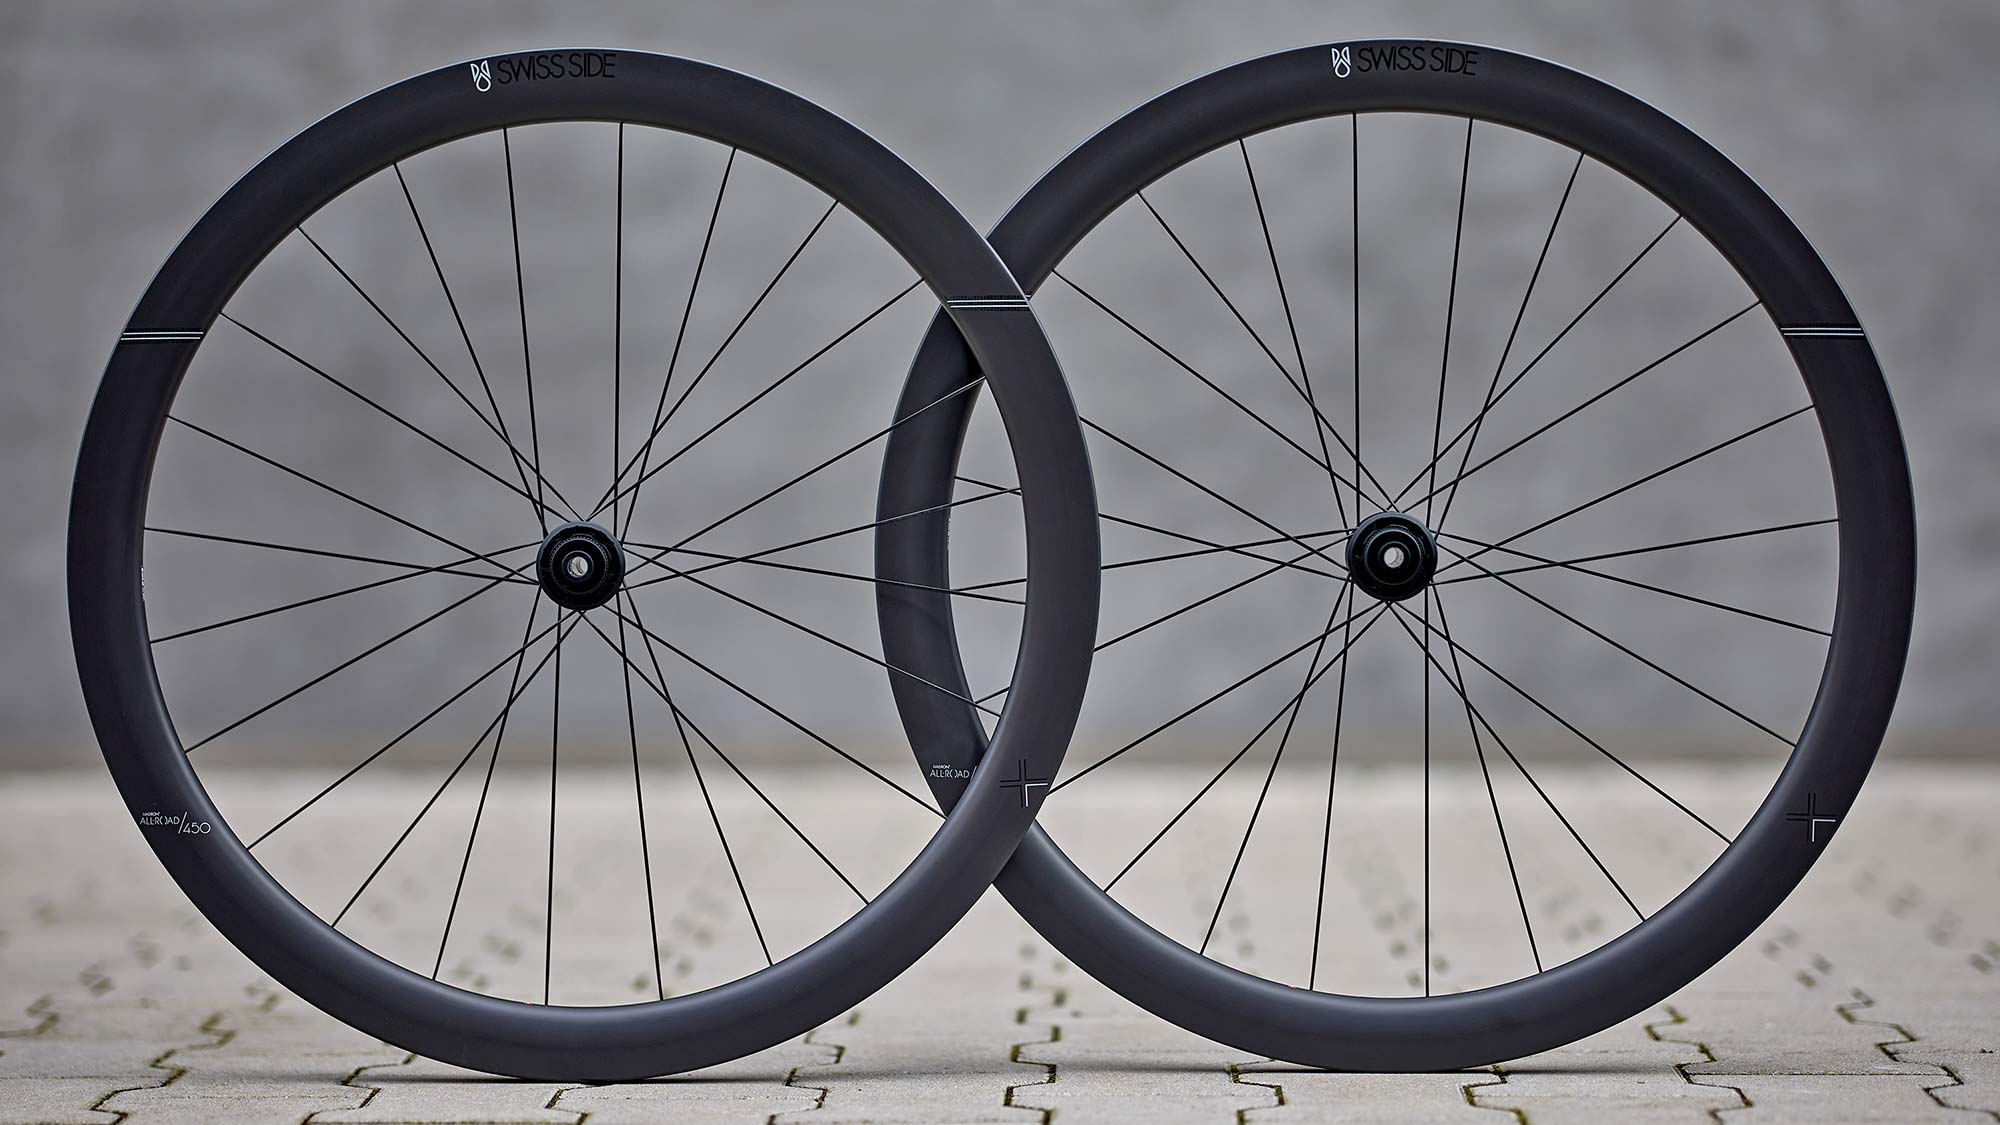 Swiss Side Hadron2 All-Road aero carbon road and gravel bike wheels, photo by Isaak Papadopoulos, pair